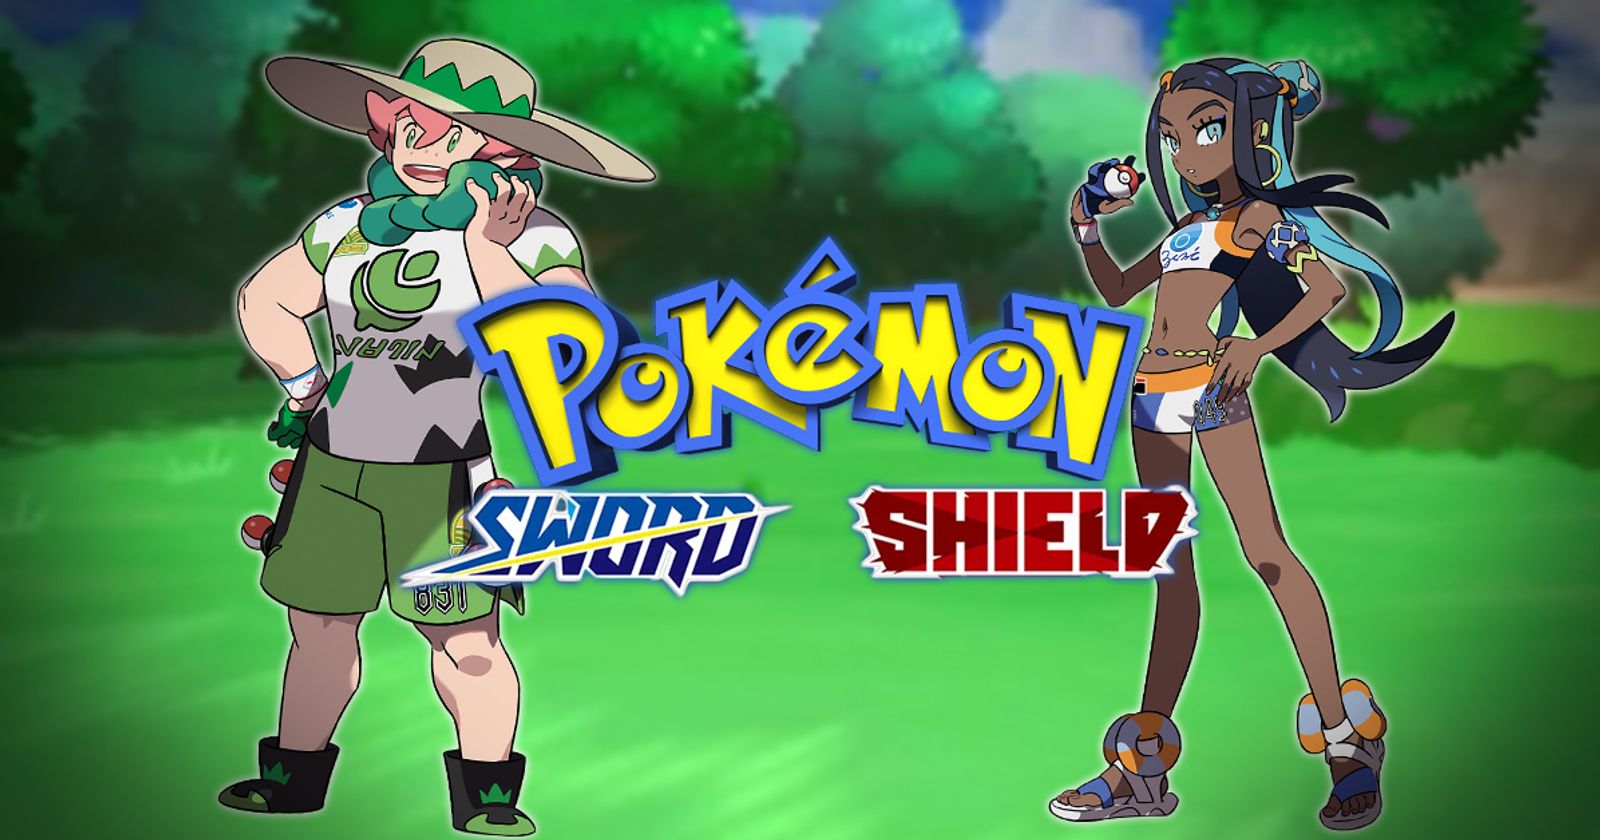 Pokemon Sword and Shield: Best Pokemon To Counter First 3 Gym Leaders